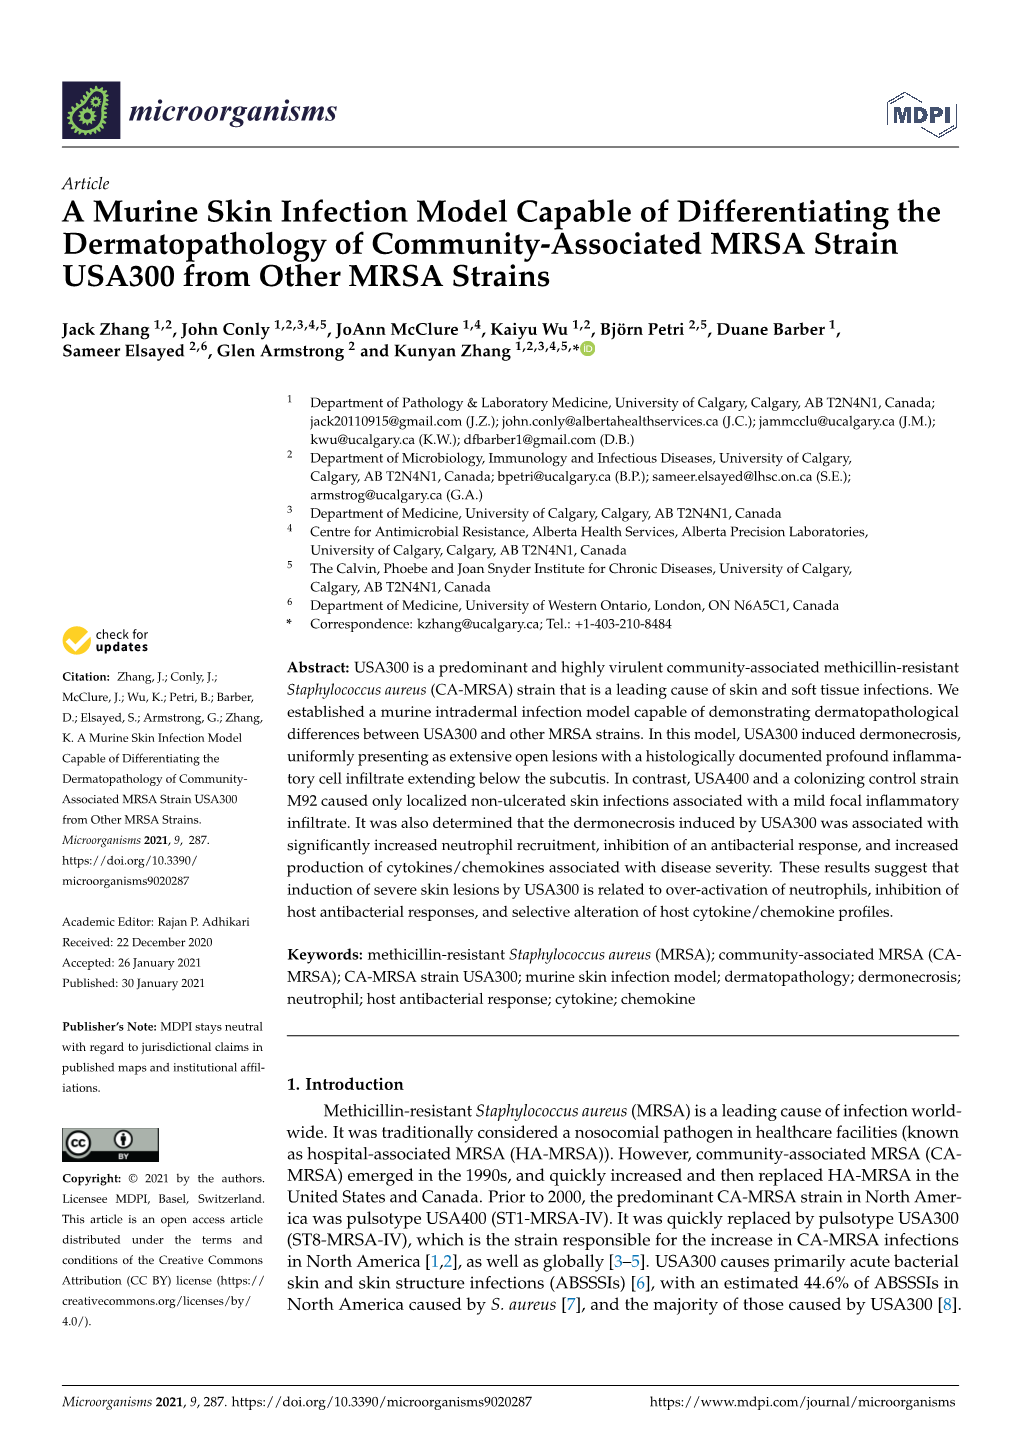 A Murine Skin Infection Model Capable of Differentiating the Dermatopathology of Community-Associated MRSA Strain USA300 from Other MRSA Strains